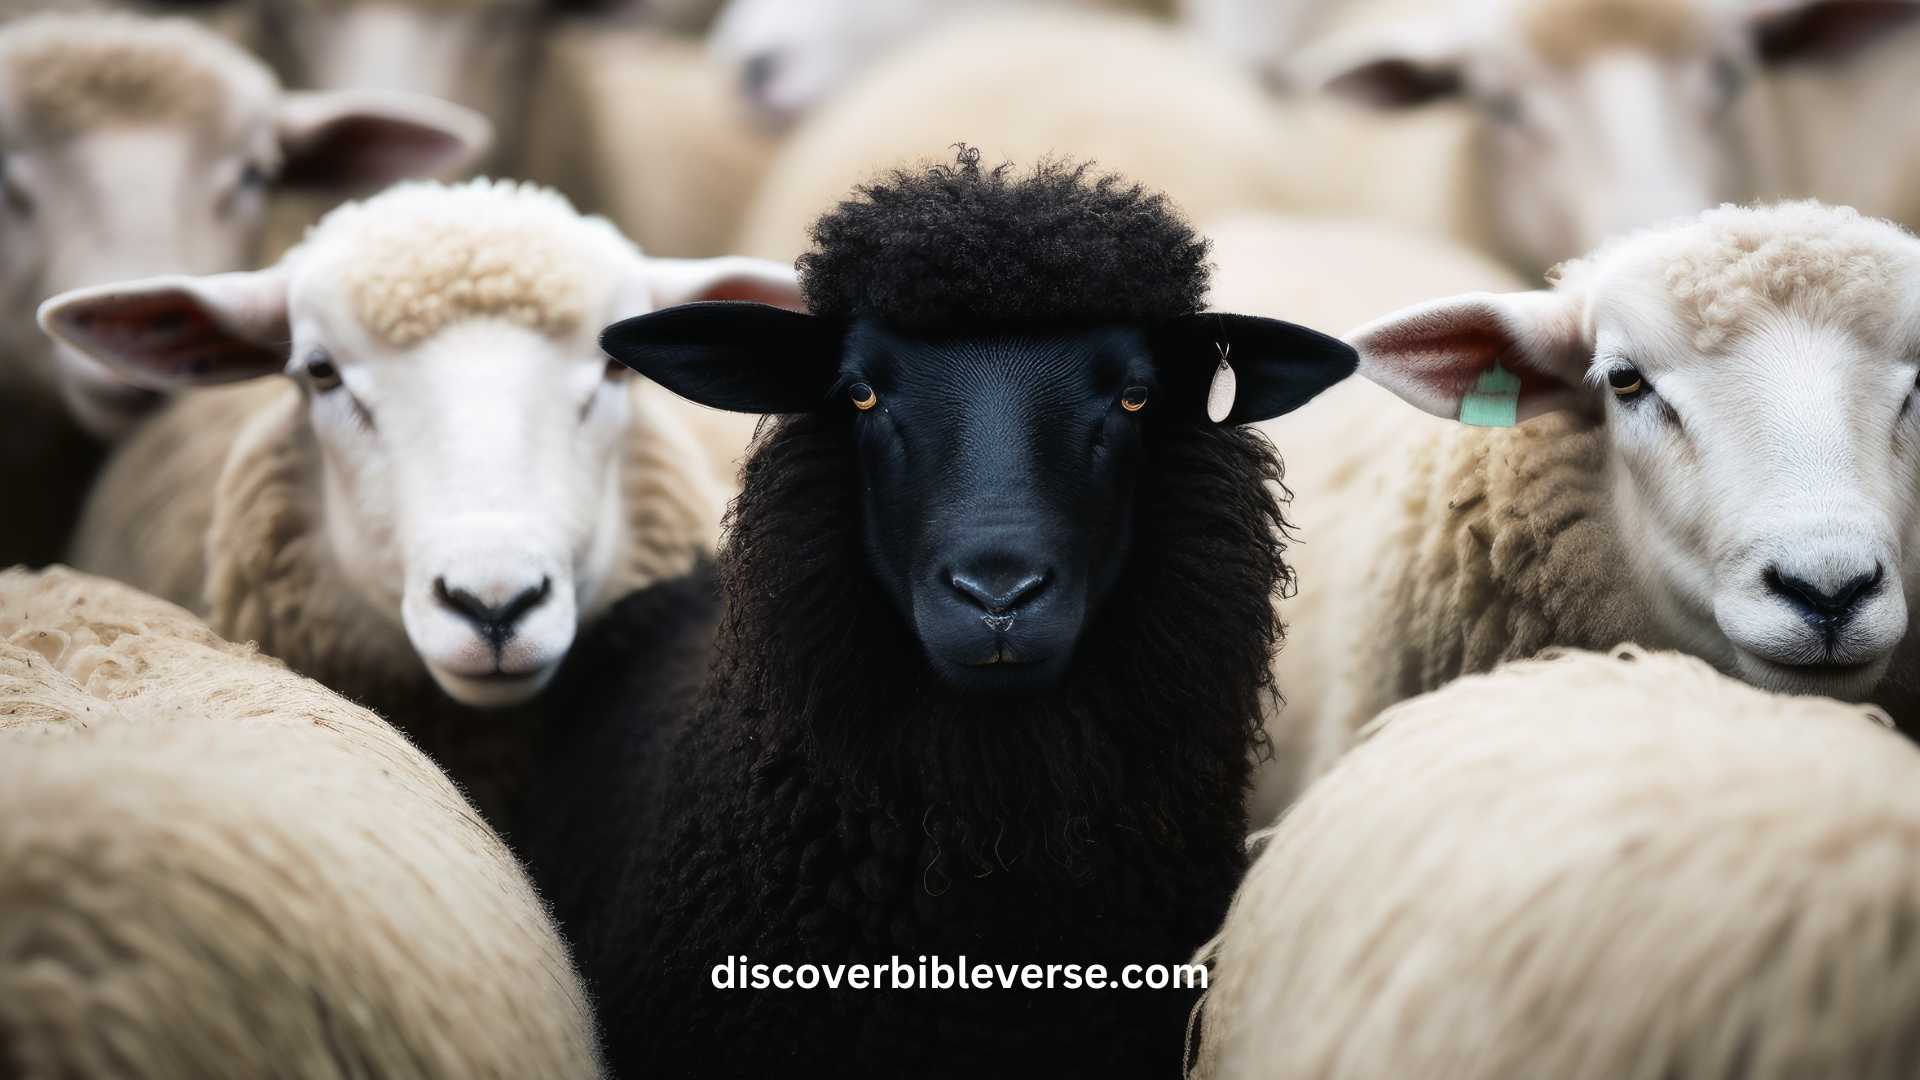 Black Sheep Meaning In The Bible